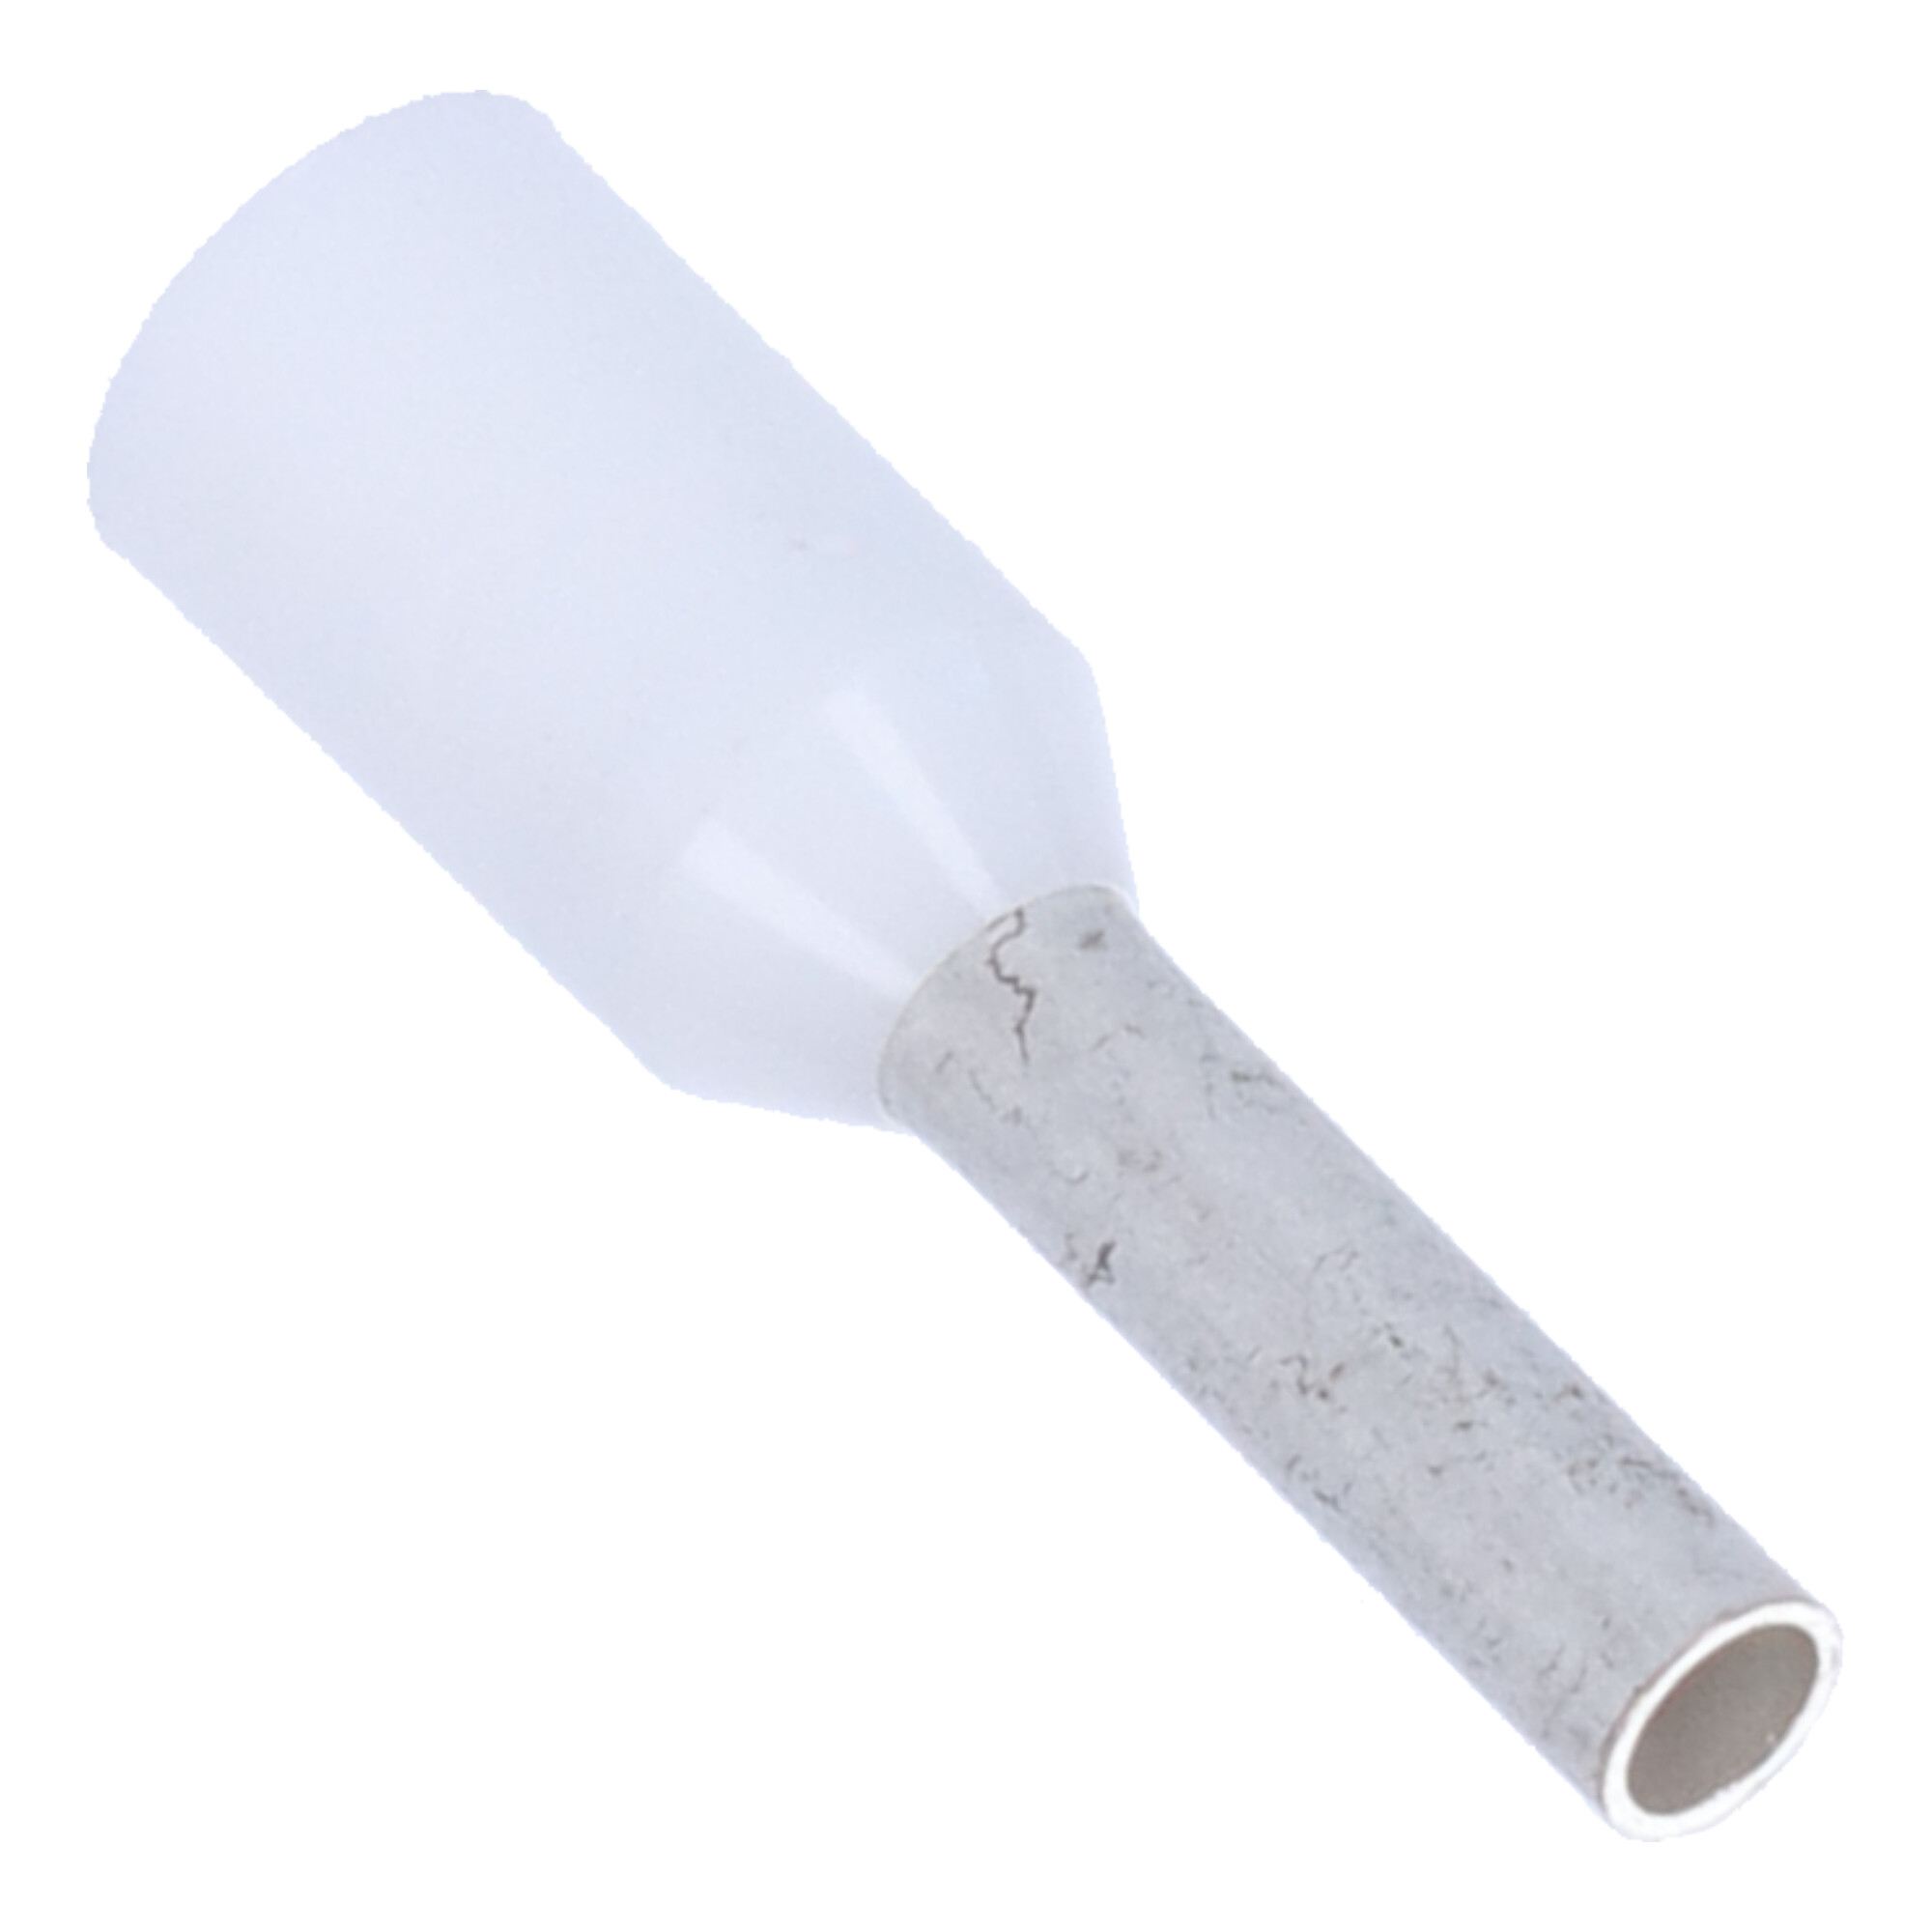 15-00535 Insulated wire end sleeve